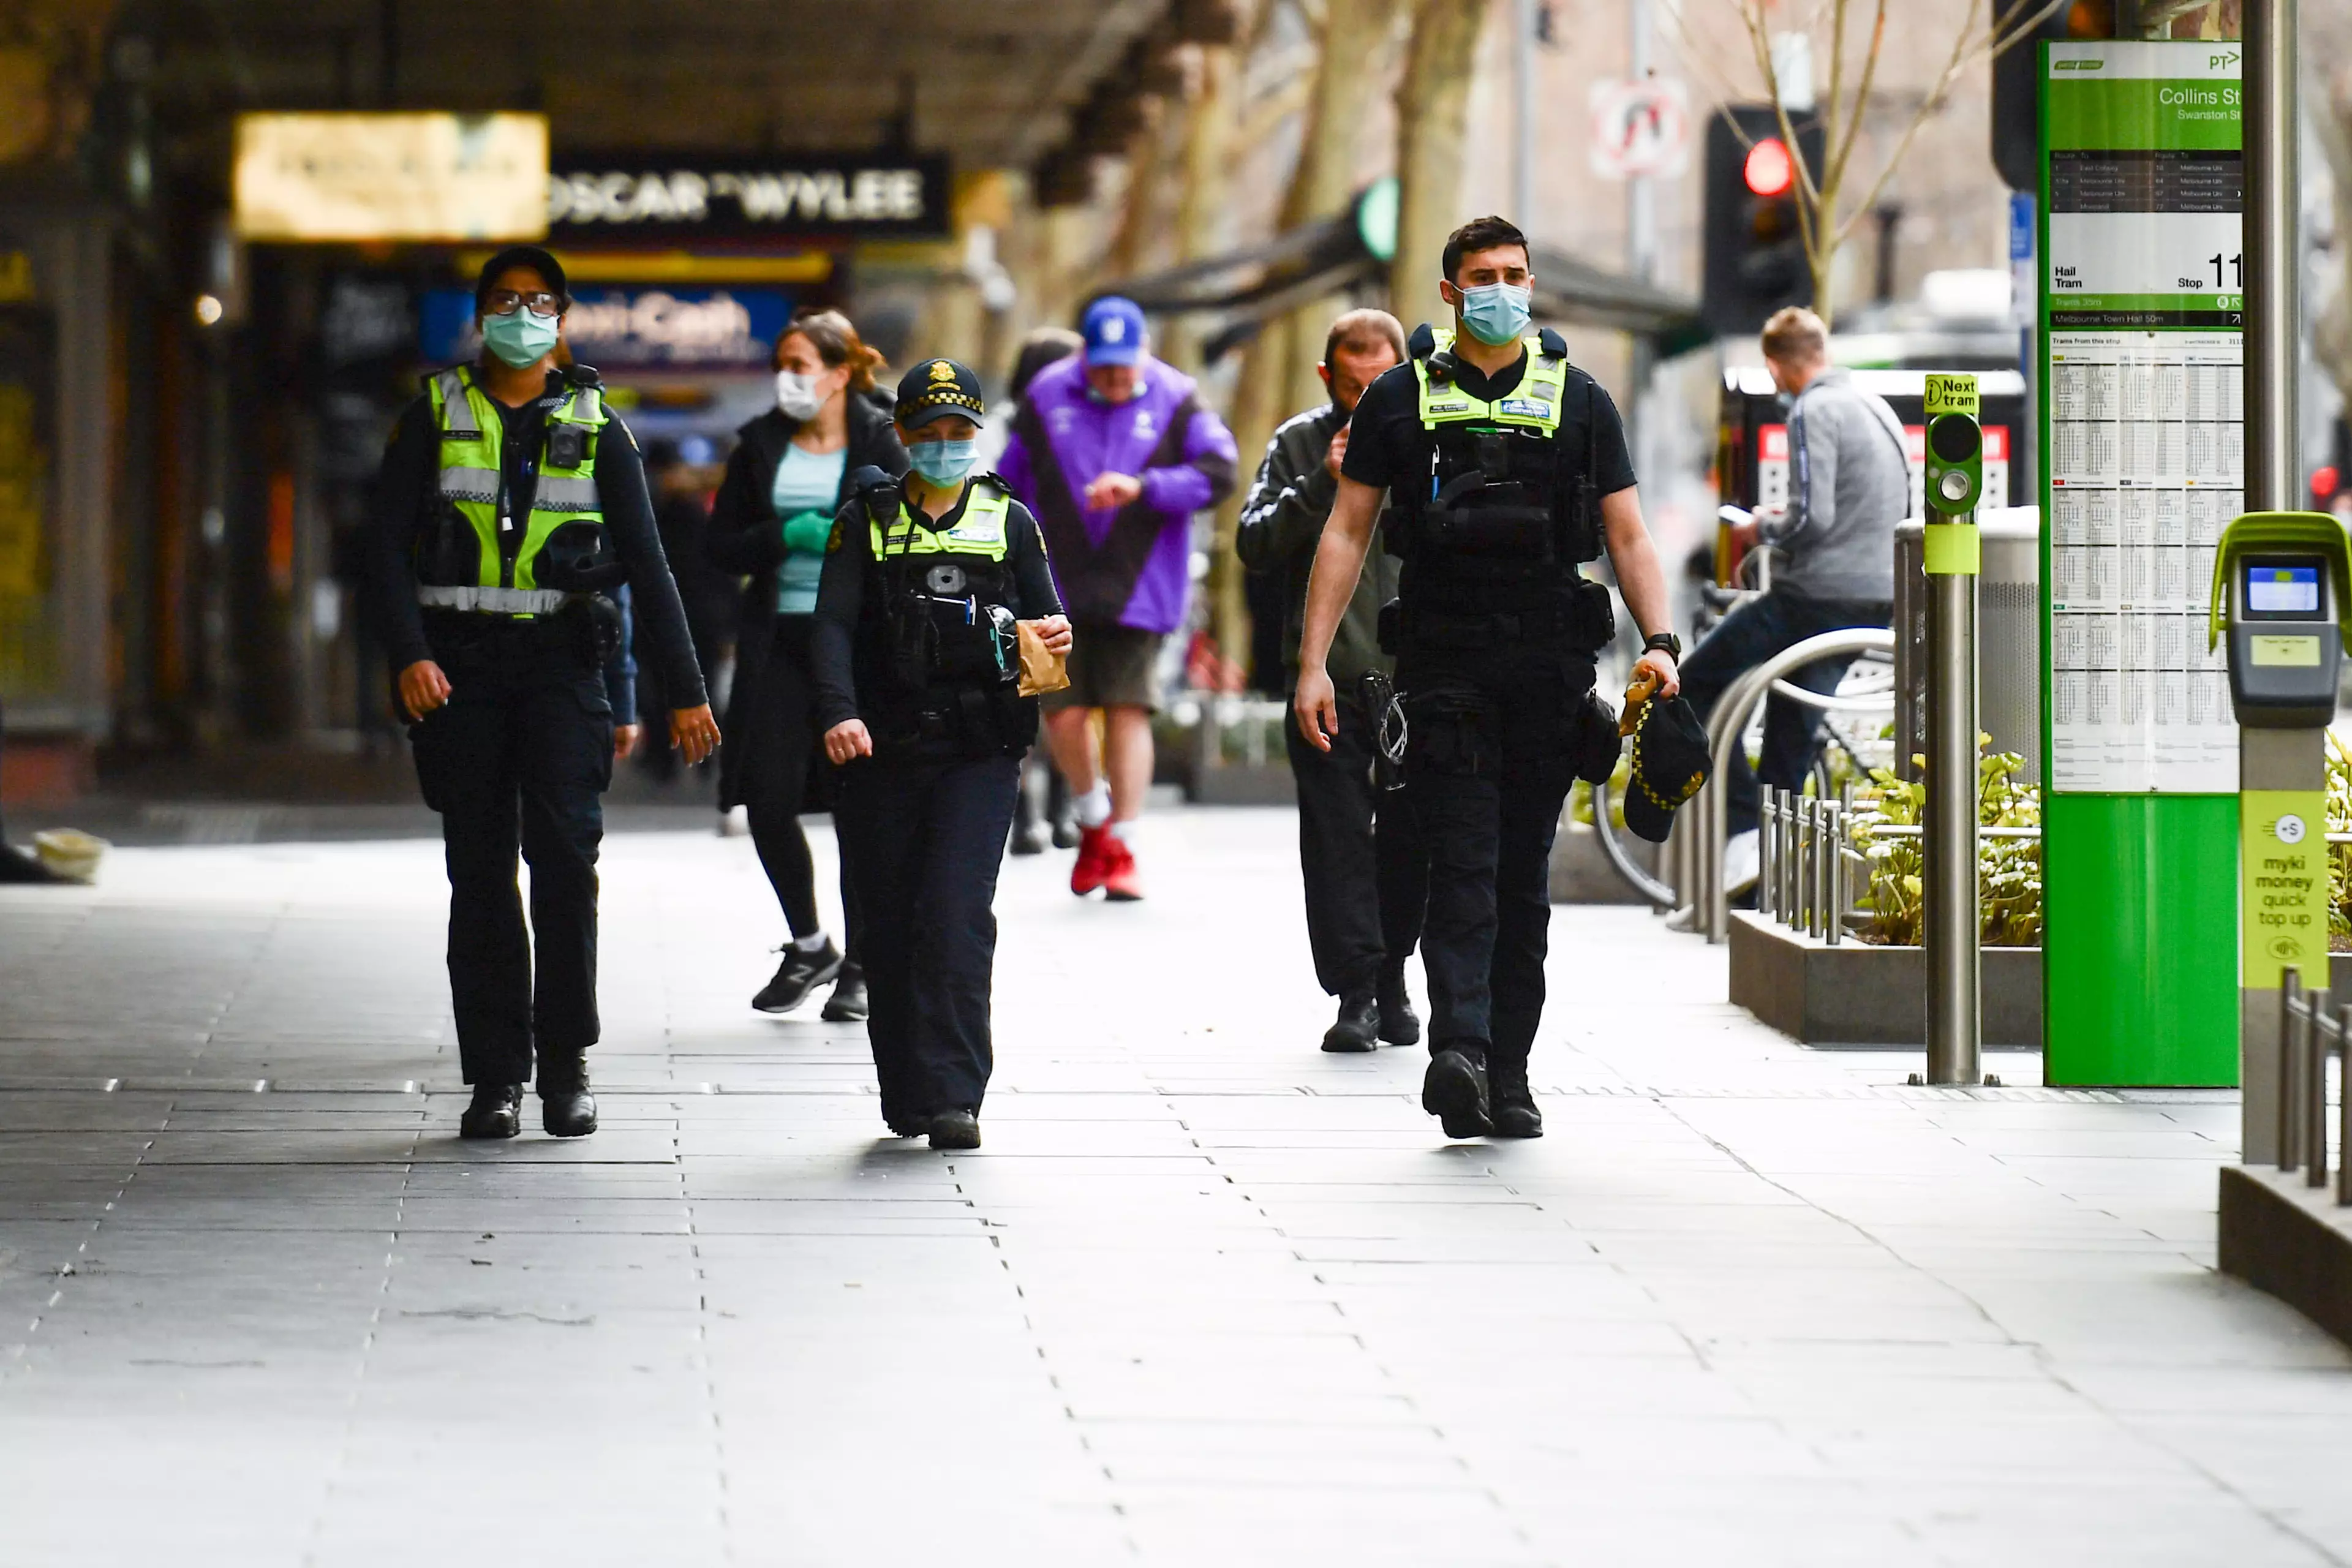 Police patrolling the streets of Melbourne.